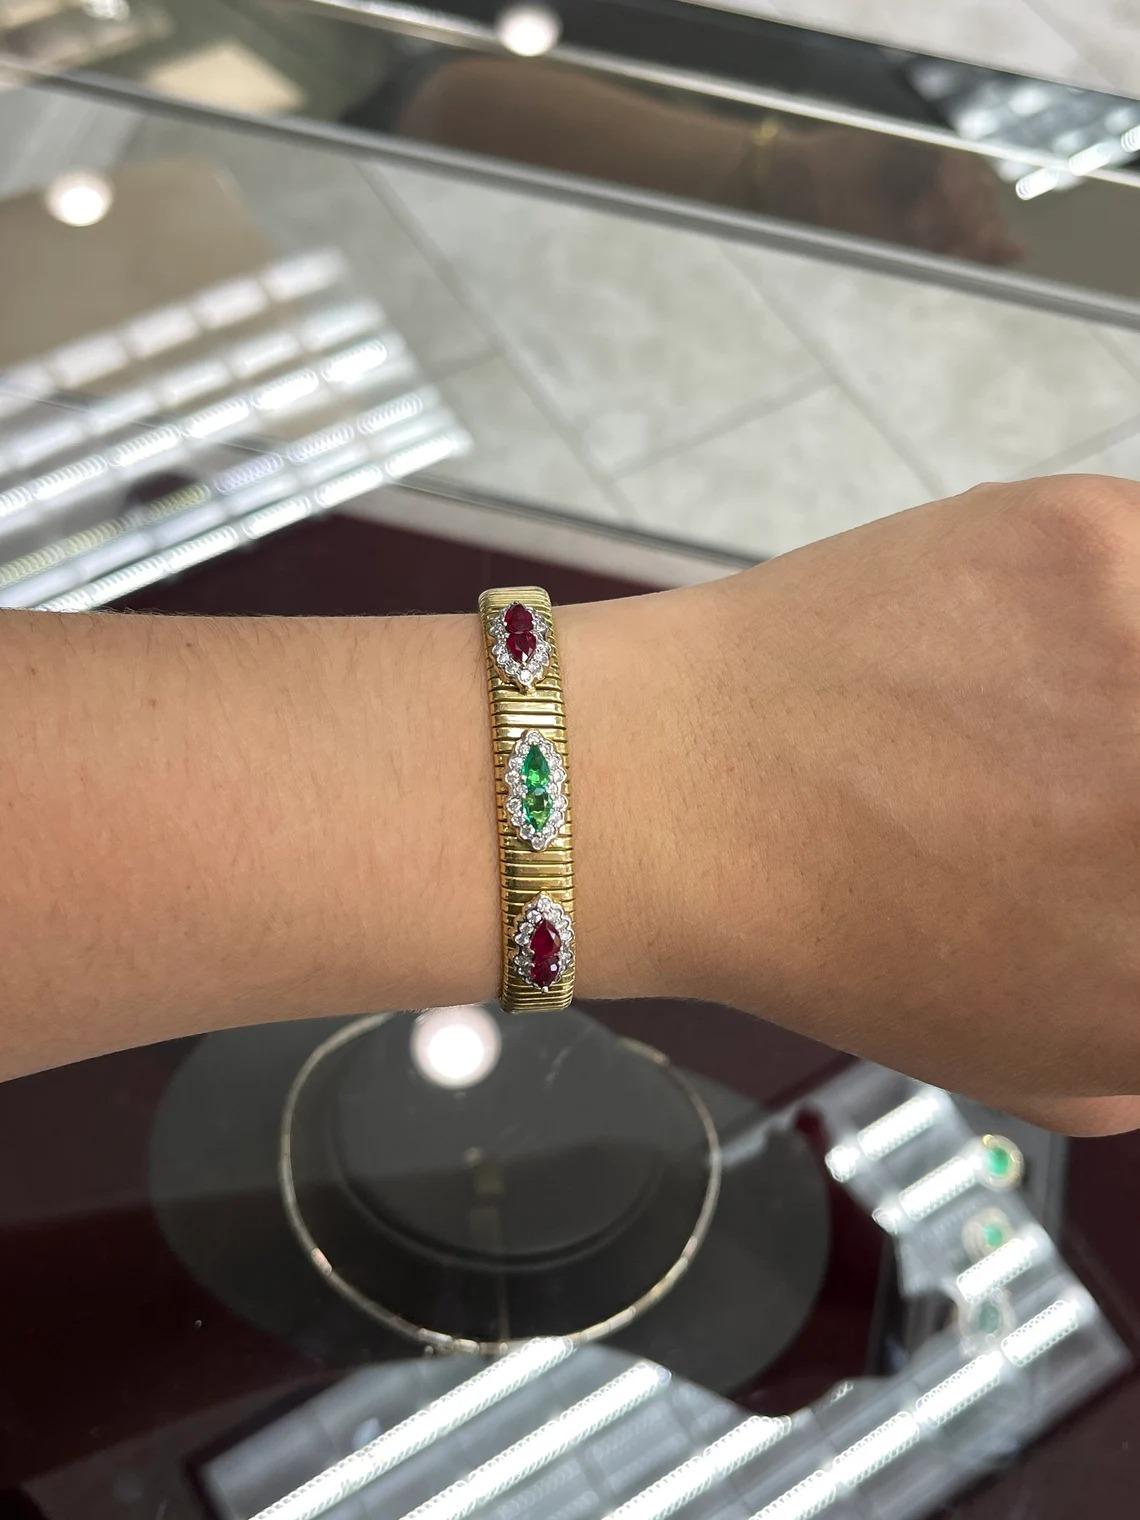 Bracelet Style: Bangle
Bracelet Length: -inches
Bracelet Width: 10.20mm

Setting Style: Bezel
Setting Material: 14K Yellow Gold
Setting Weight: 32.3 Grams

Main Stone: Emerald
Shape: Pear Cut
Weight: 0.60-Carats (Total)
Clarity: Transparent
Color: